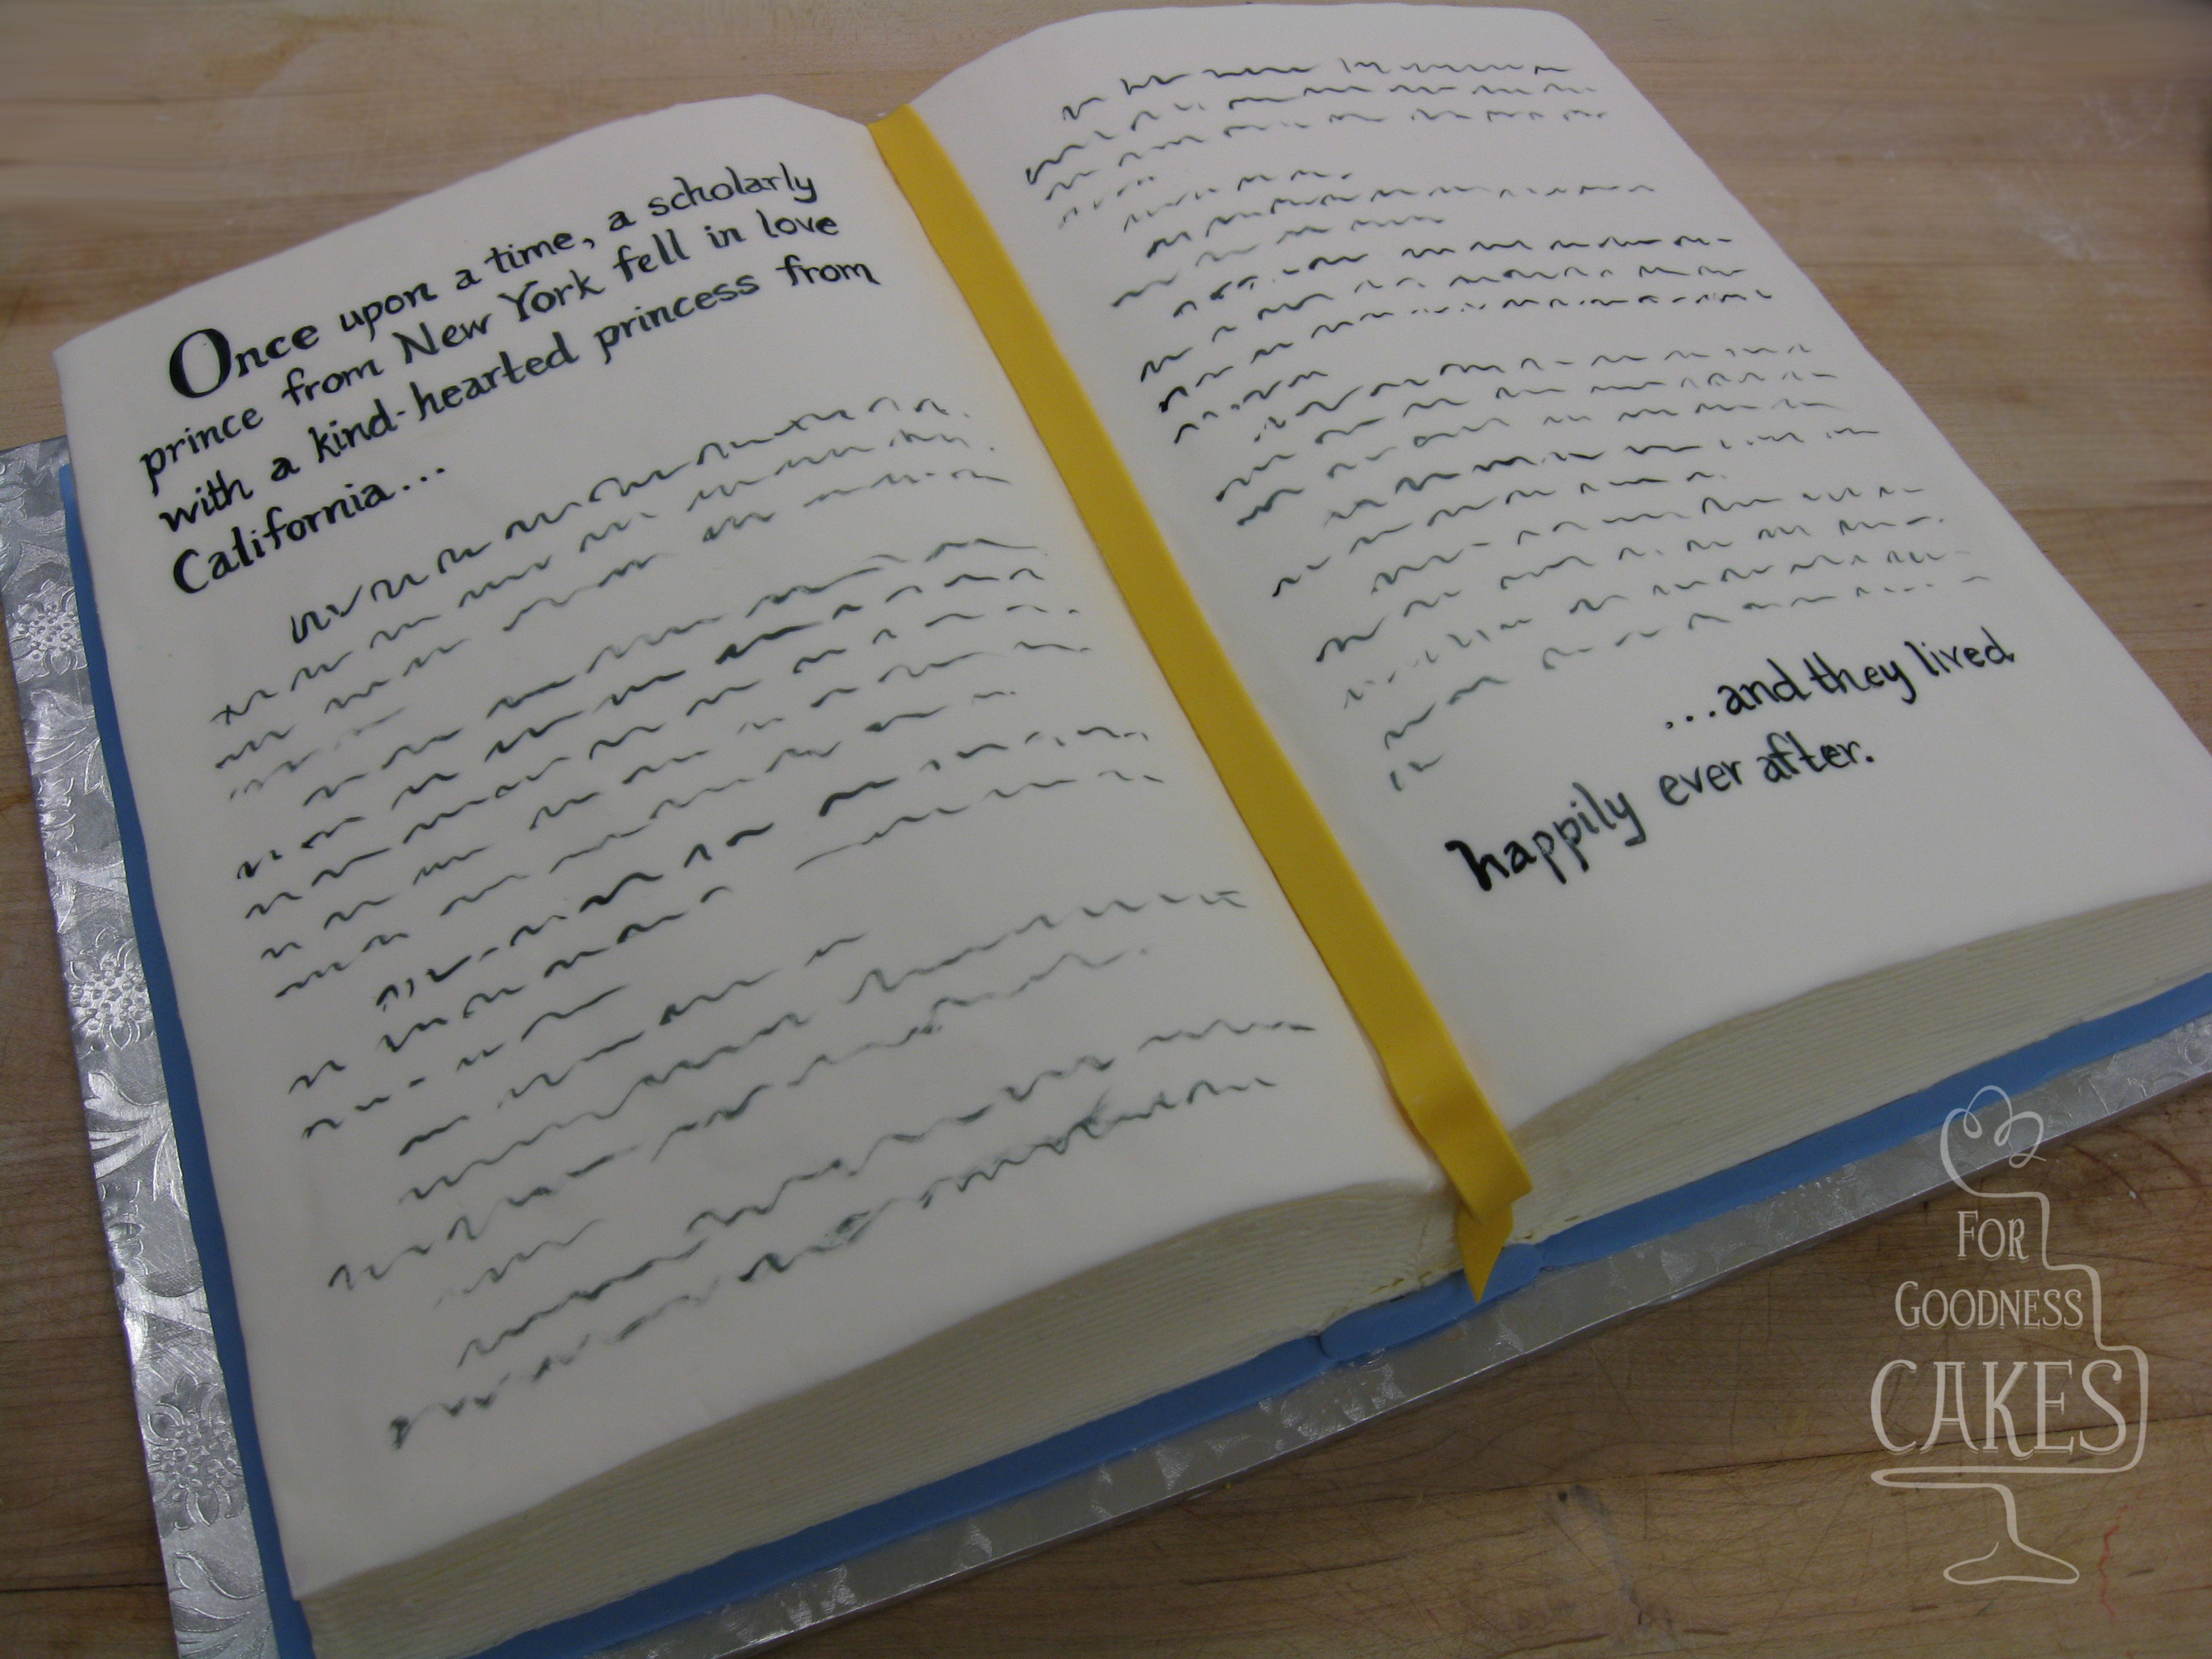 Great birthday cake for a book lover - Gail Holloway Cakes | Facebook